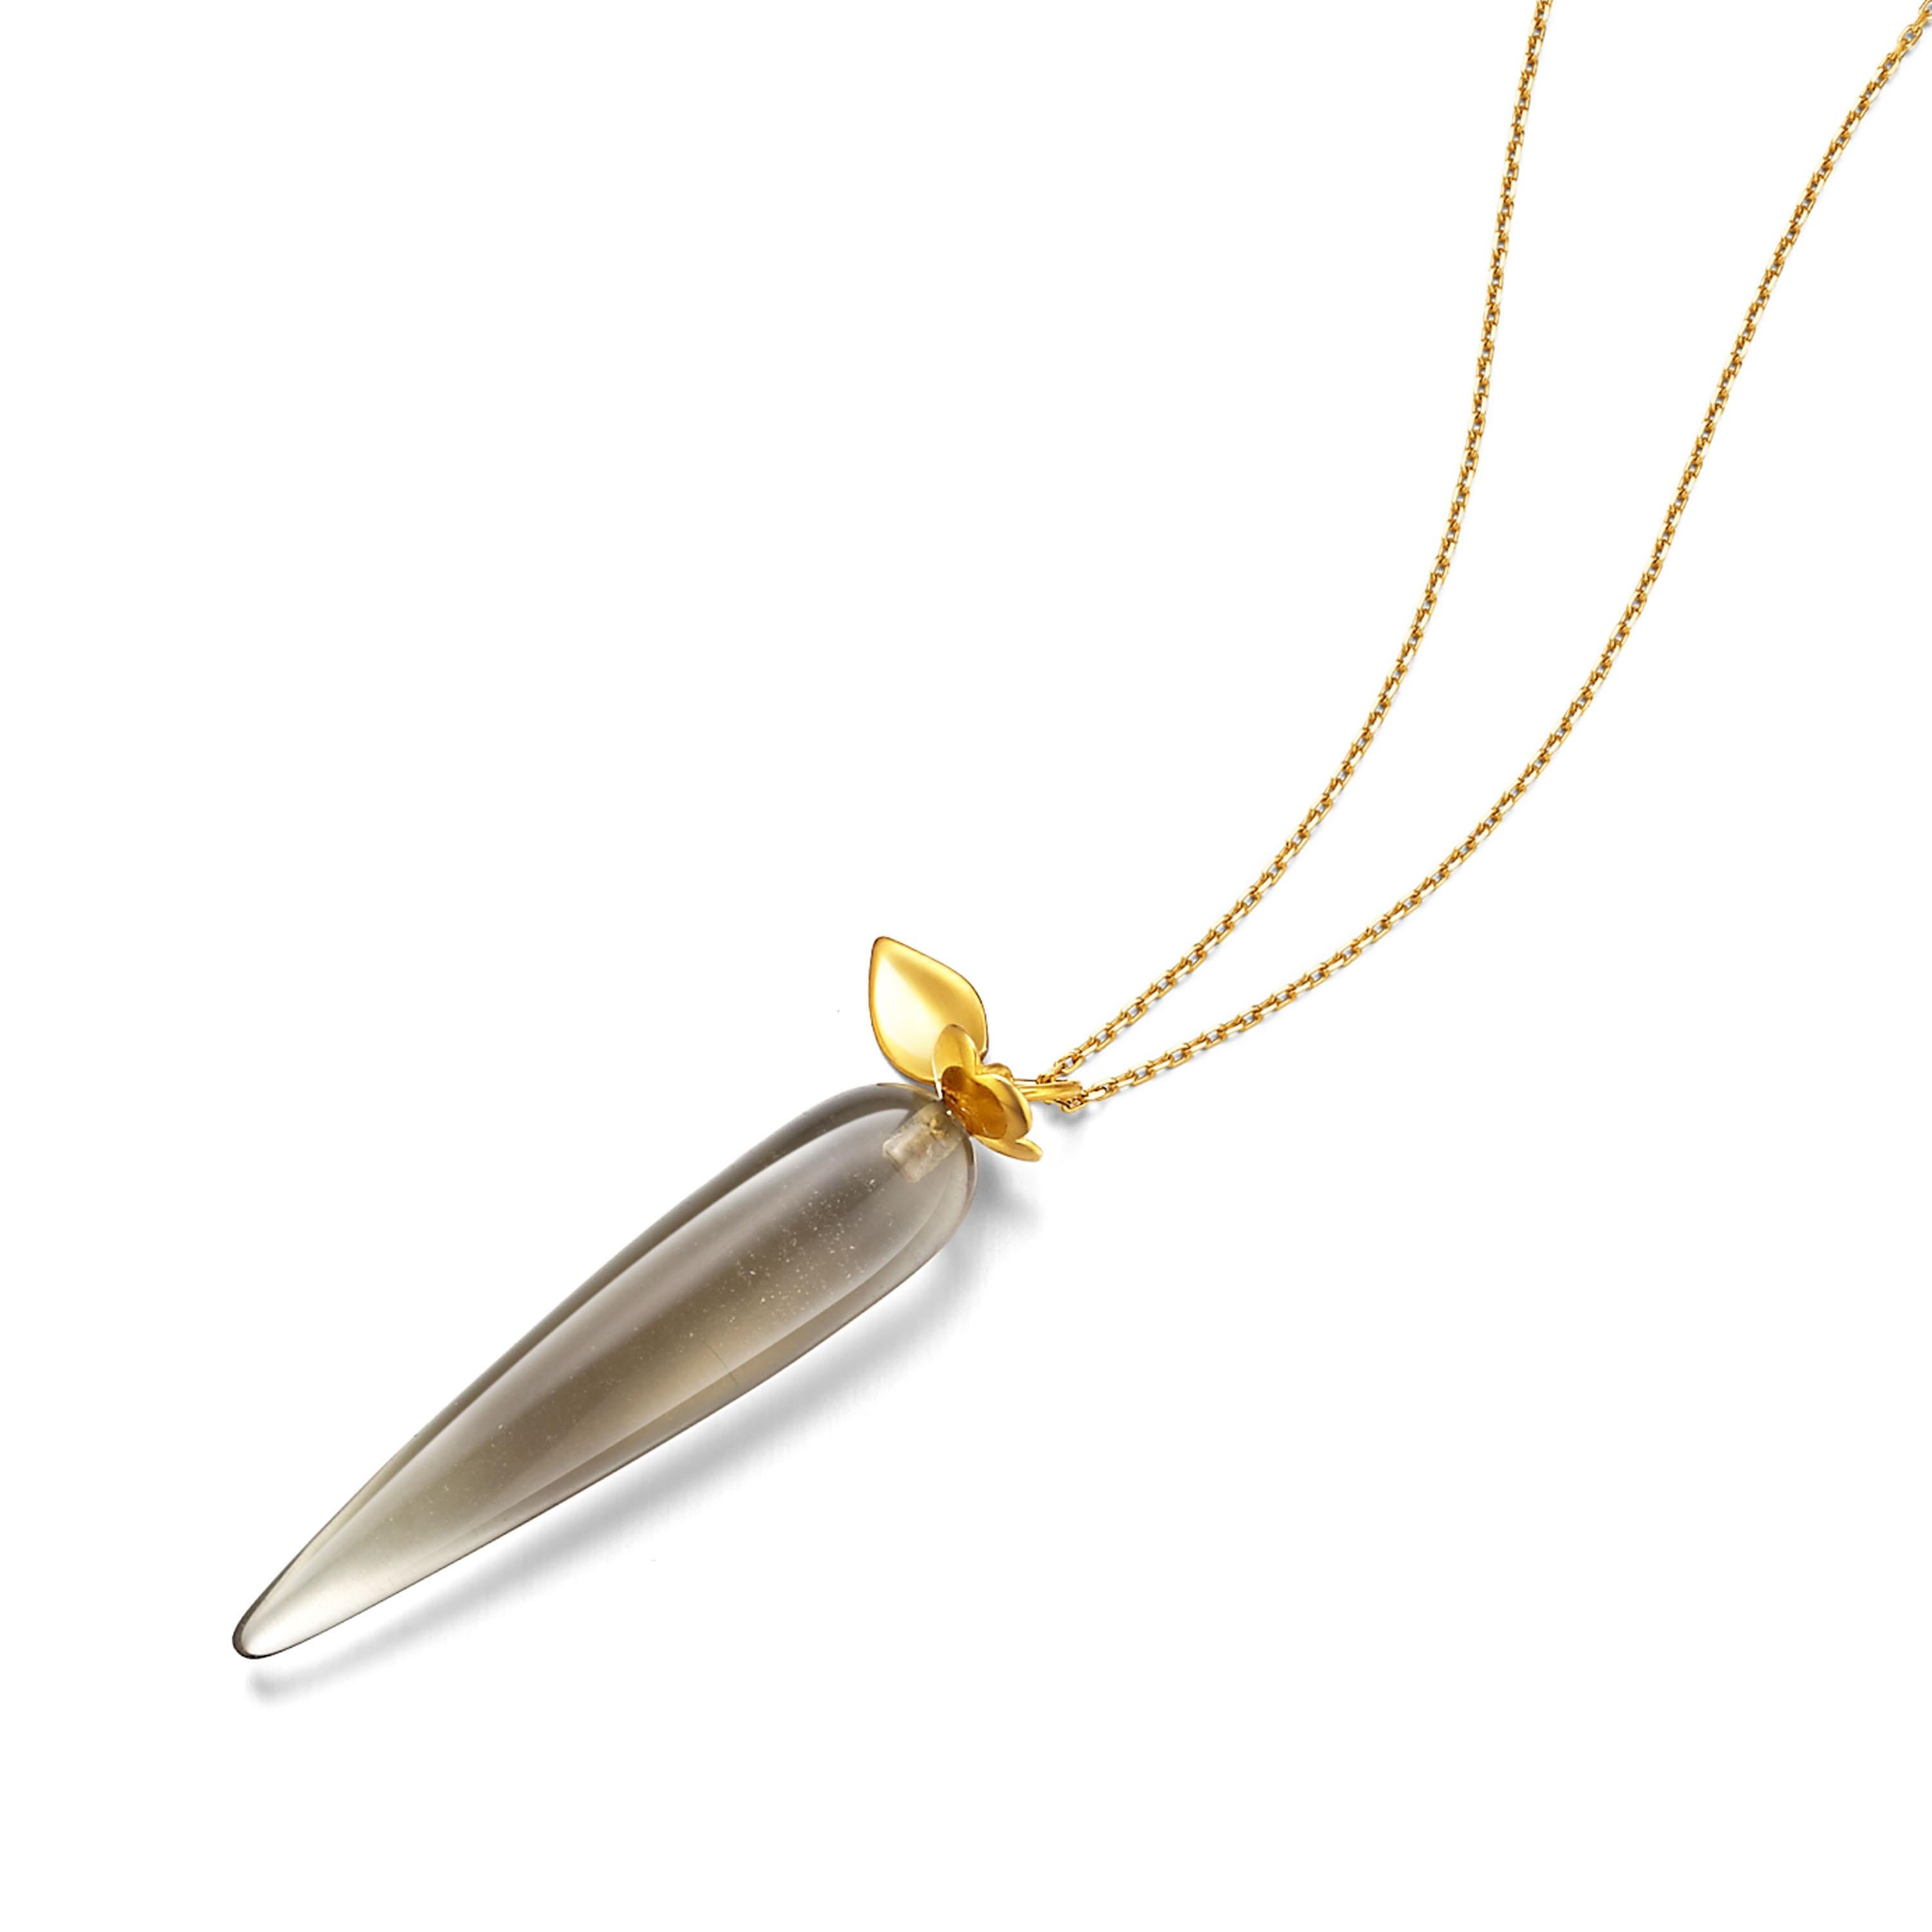 Description:
A sophisticated pendant featuring a teardrop of “stone of power” smoky quartz adorned with delicate petals of 18ct gold plate on sterling silver.

Specification:
Size (LxW): 45mm x 9mm
Weight per earring: 5.7gm
Stones: smoky